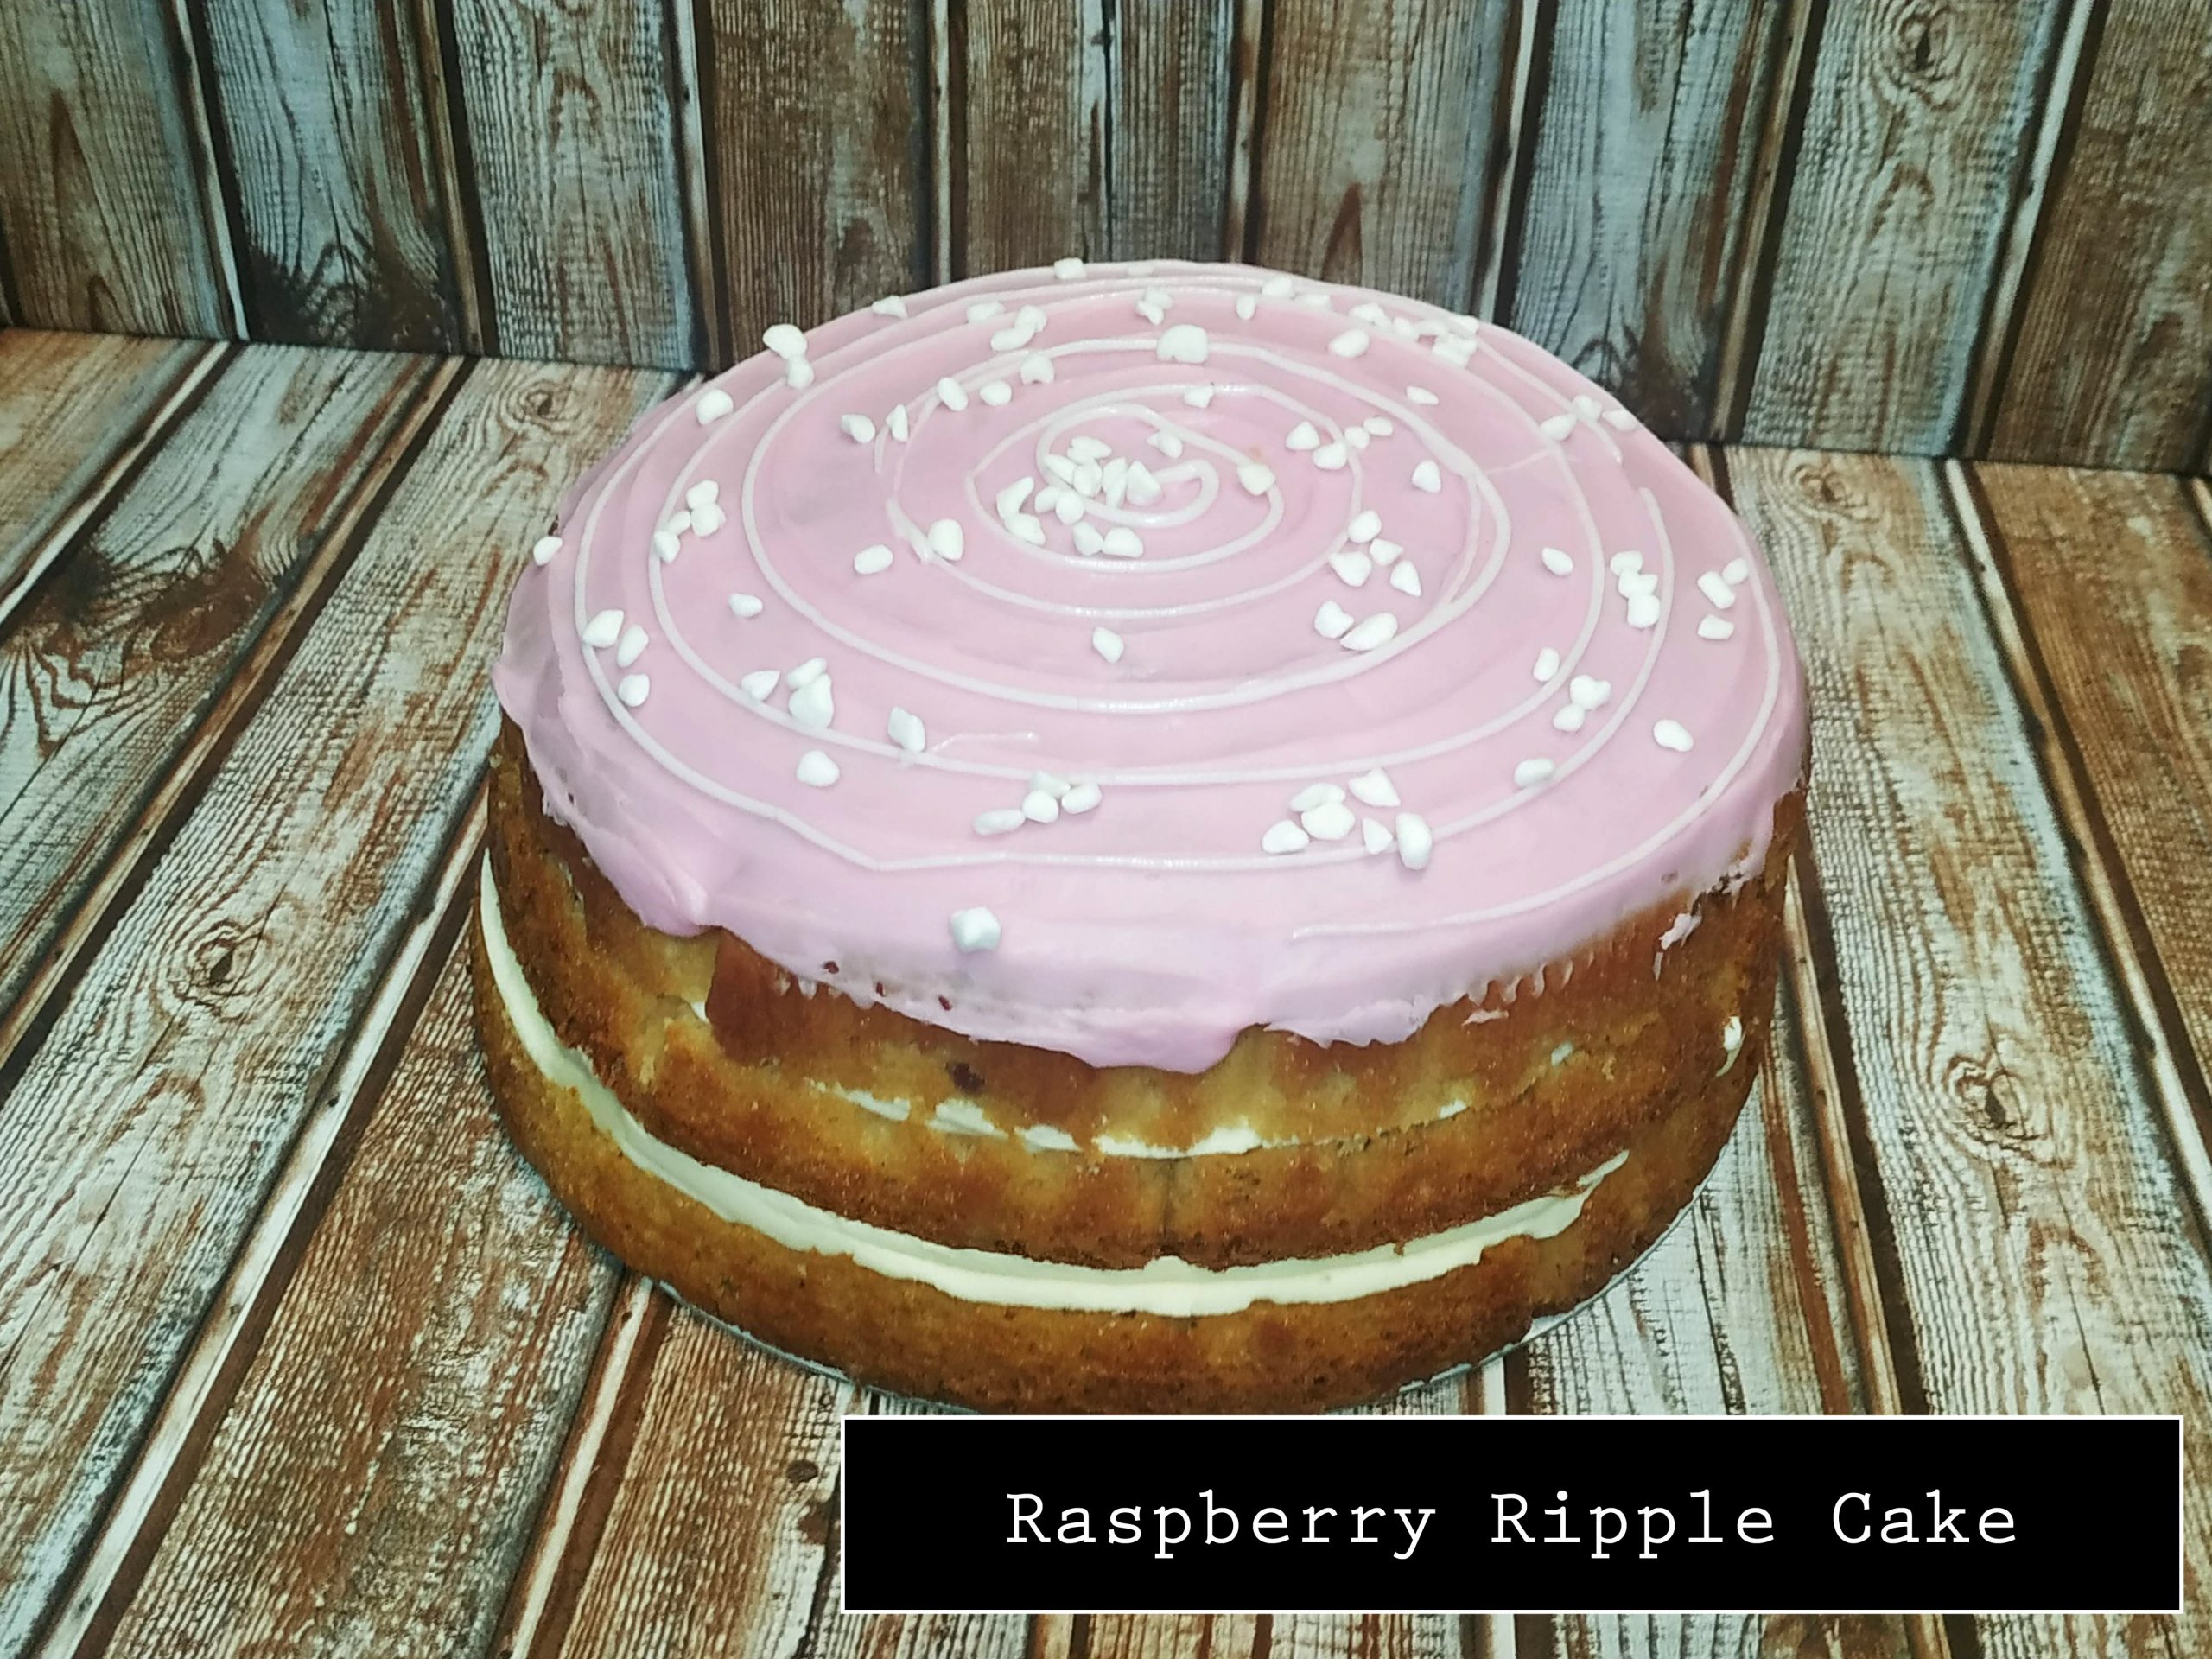 Raspberry Ripple Cake by Sandwich in the Square